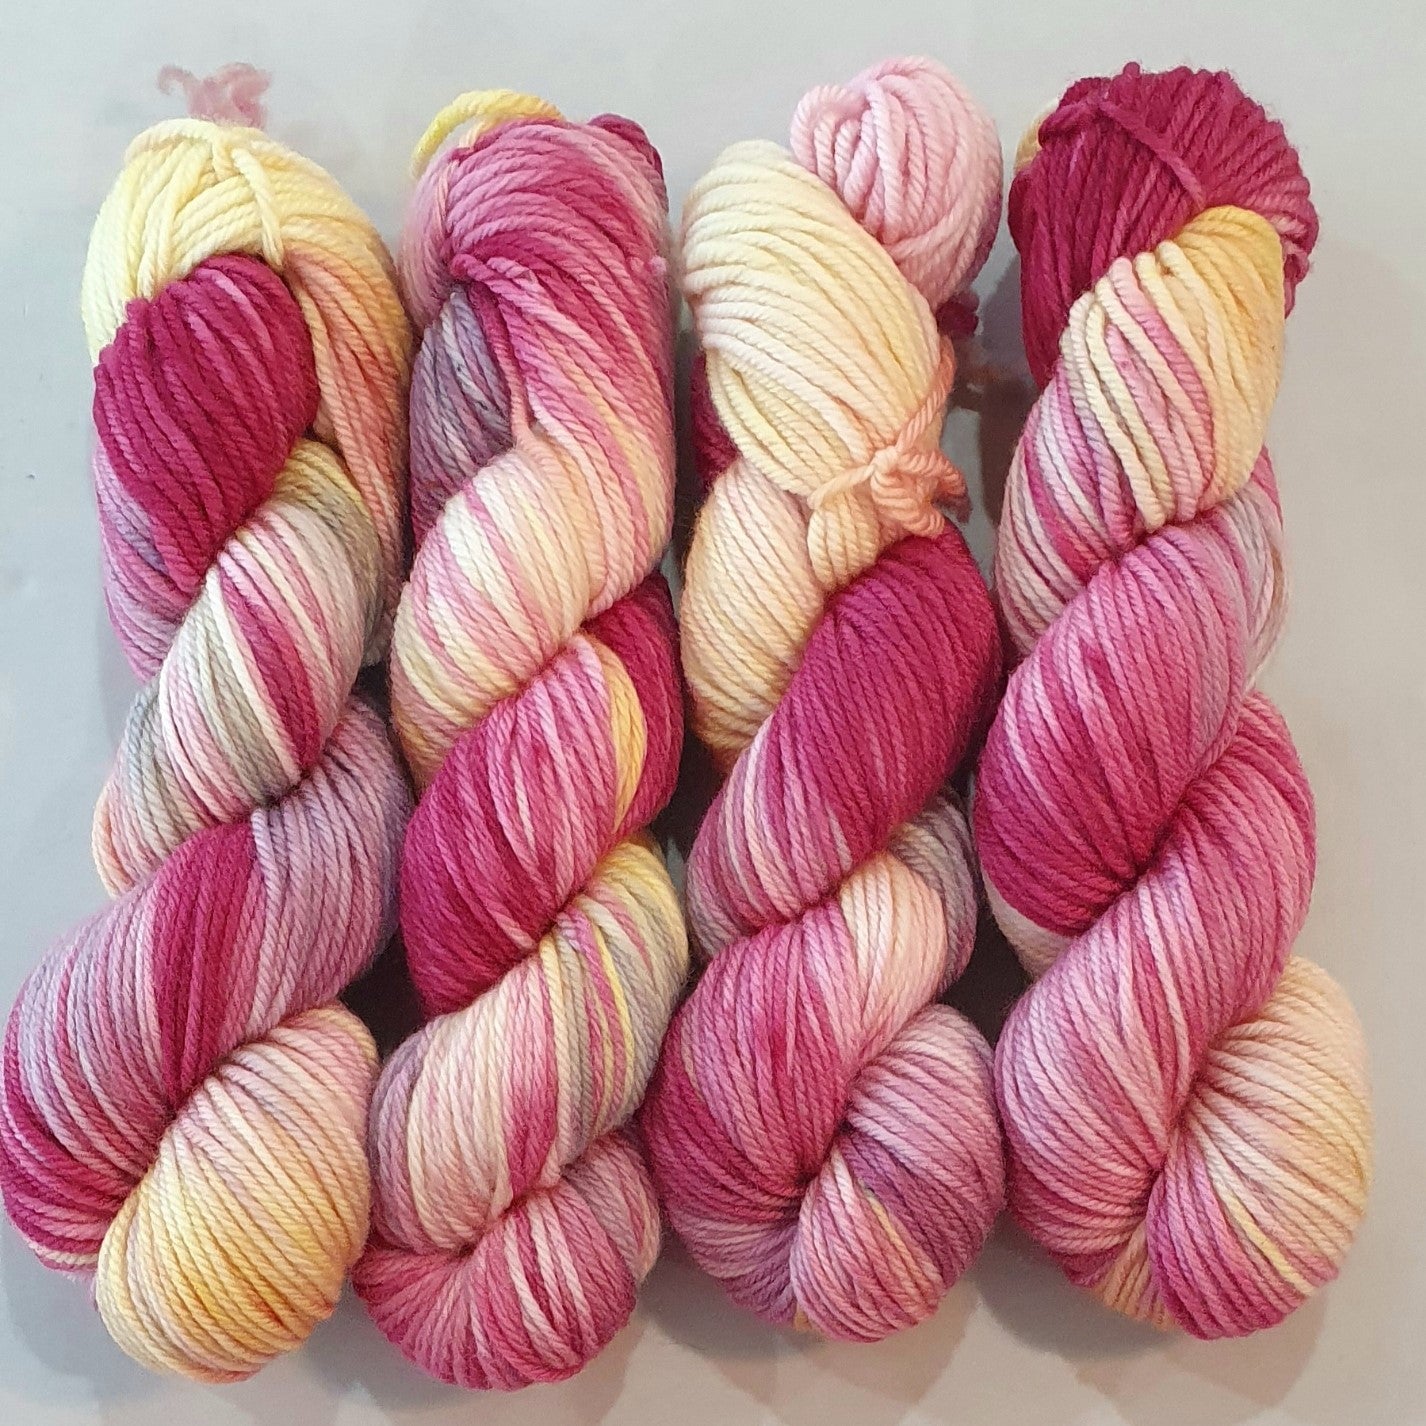 Winter Sweet (Wyvern Worsted 12ply)